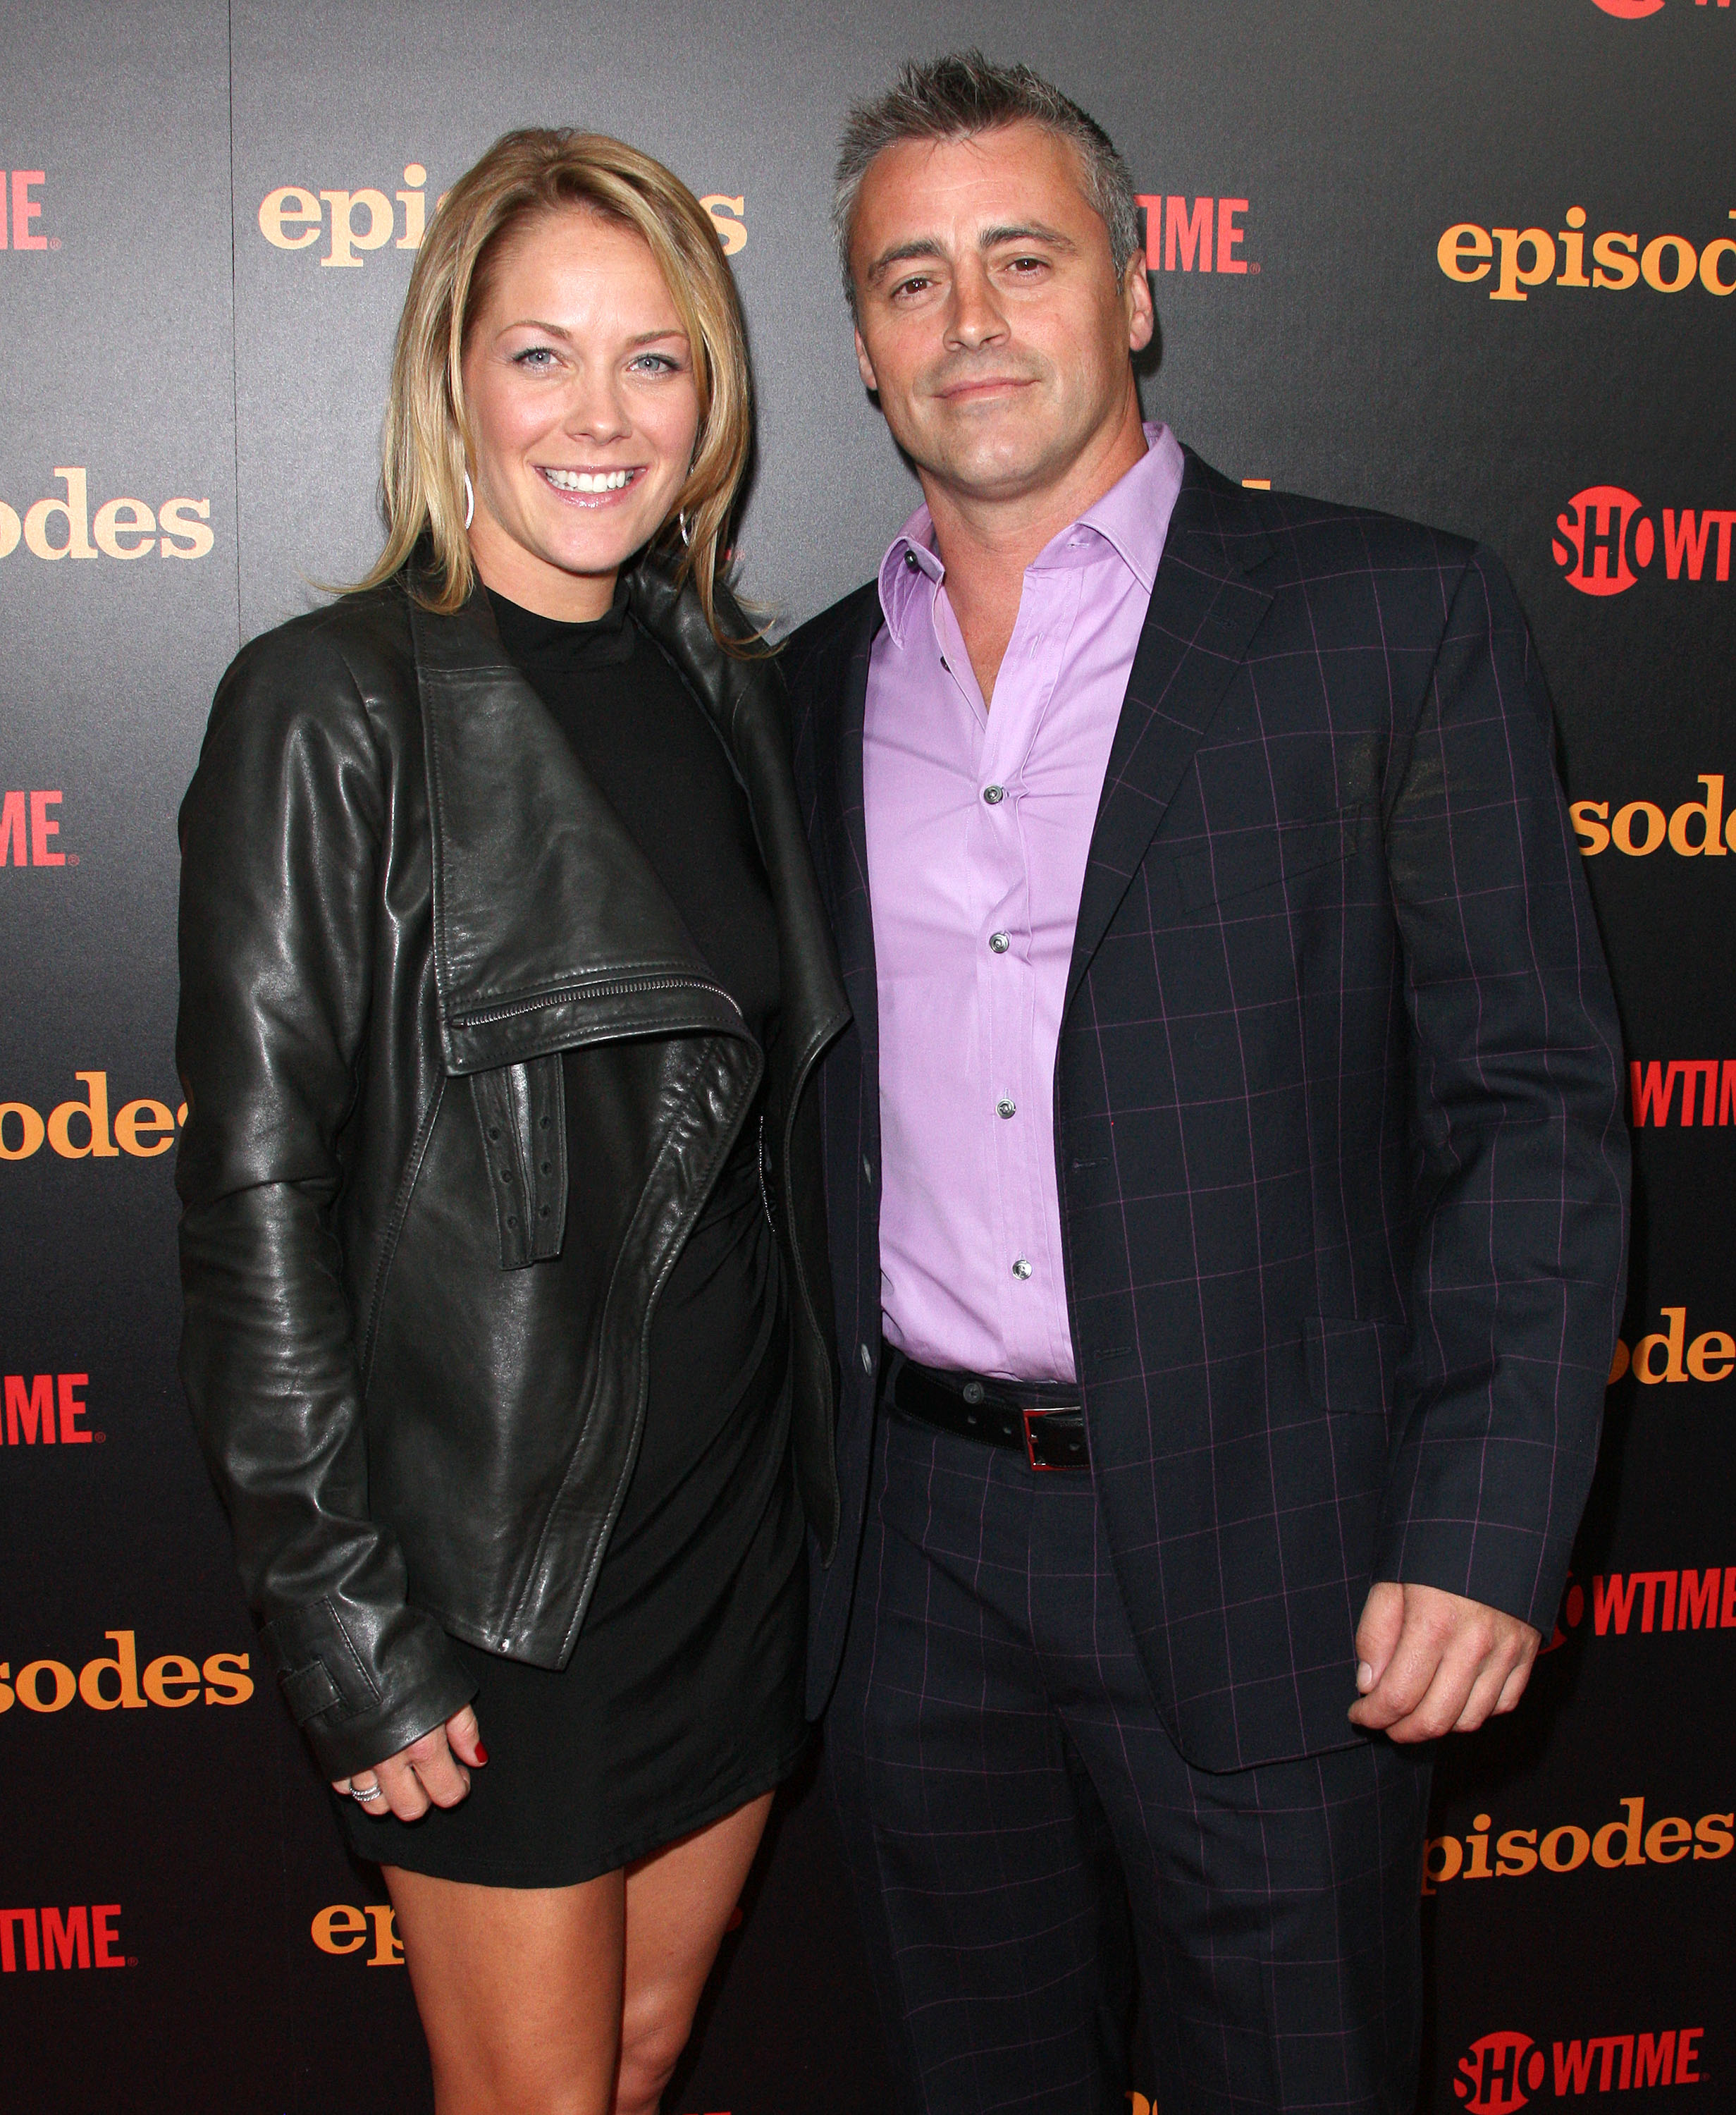 Melissa McKnight and actor Matt LeBlanc at the "Episodes" premiere in 2012 | Source: Getty Images